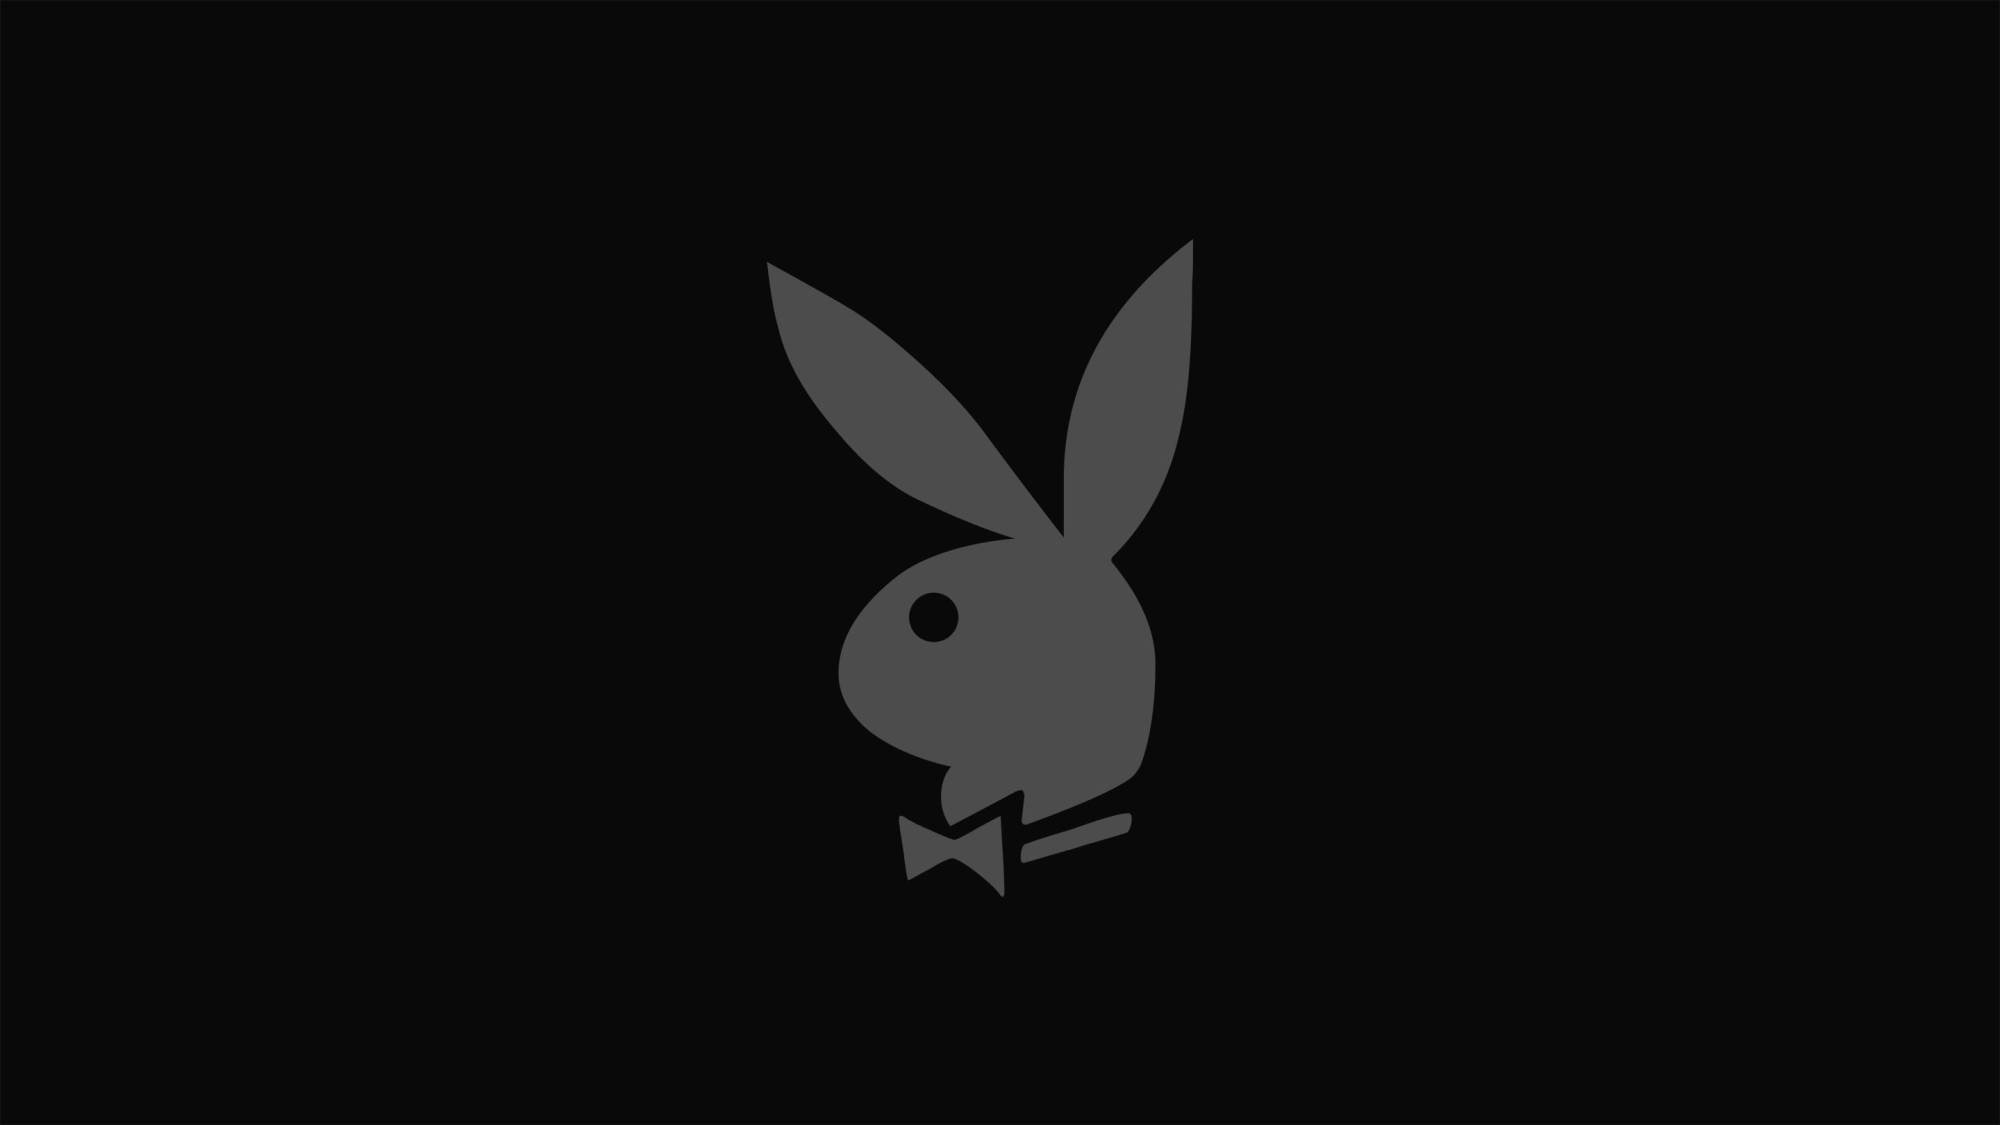 Playboy wallpaper for iphone